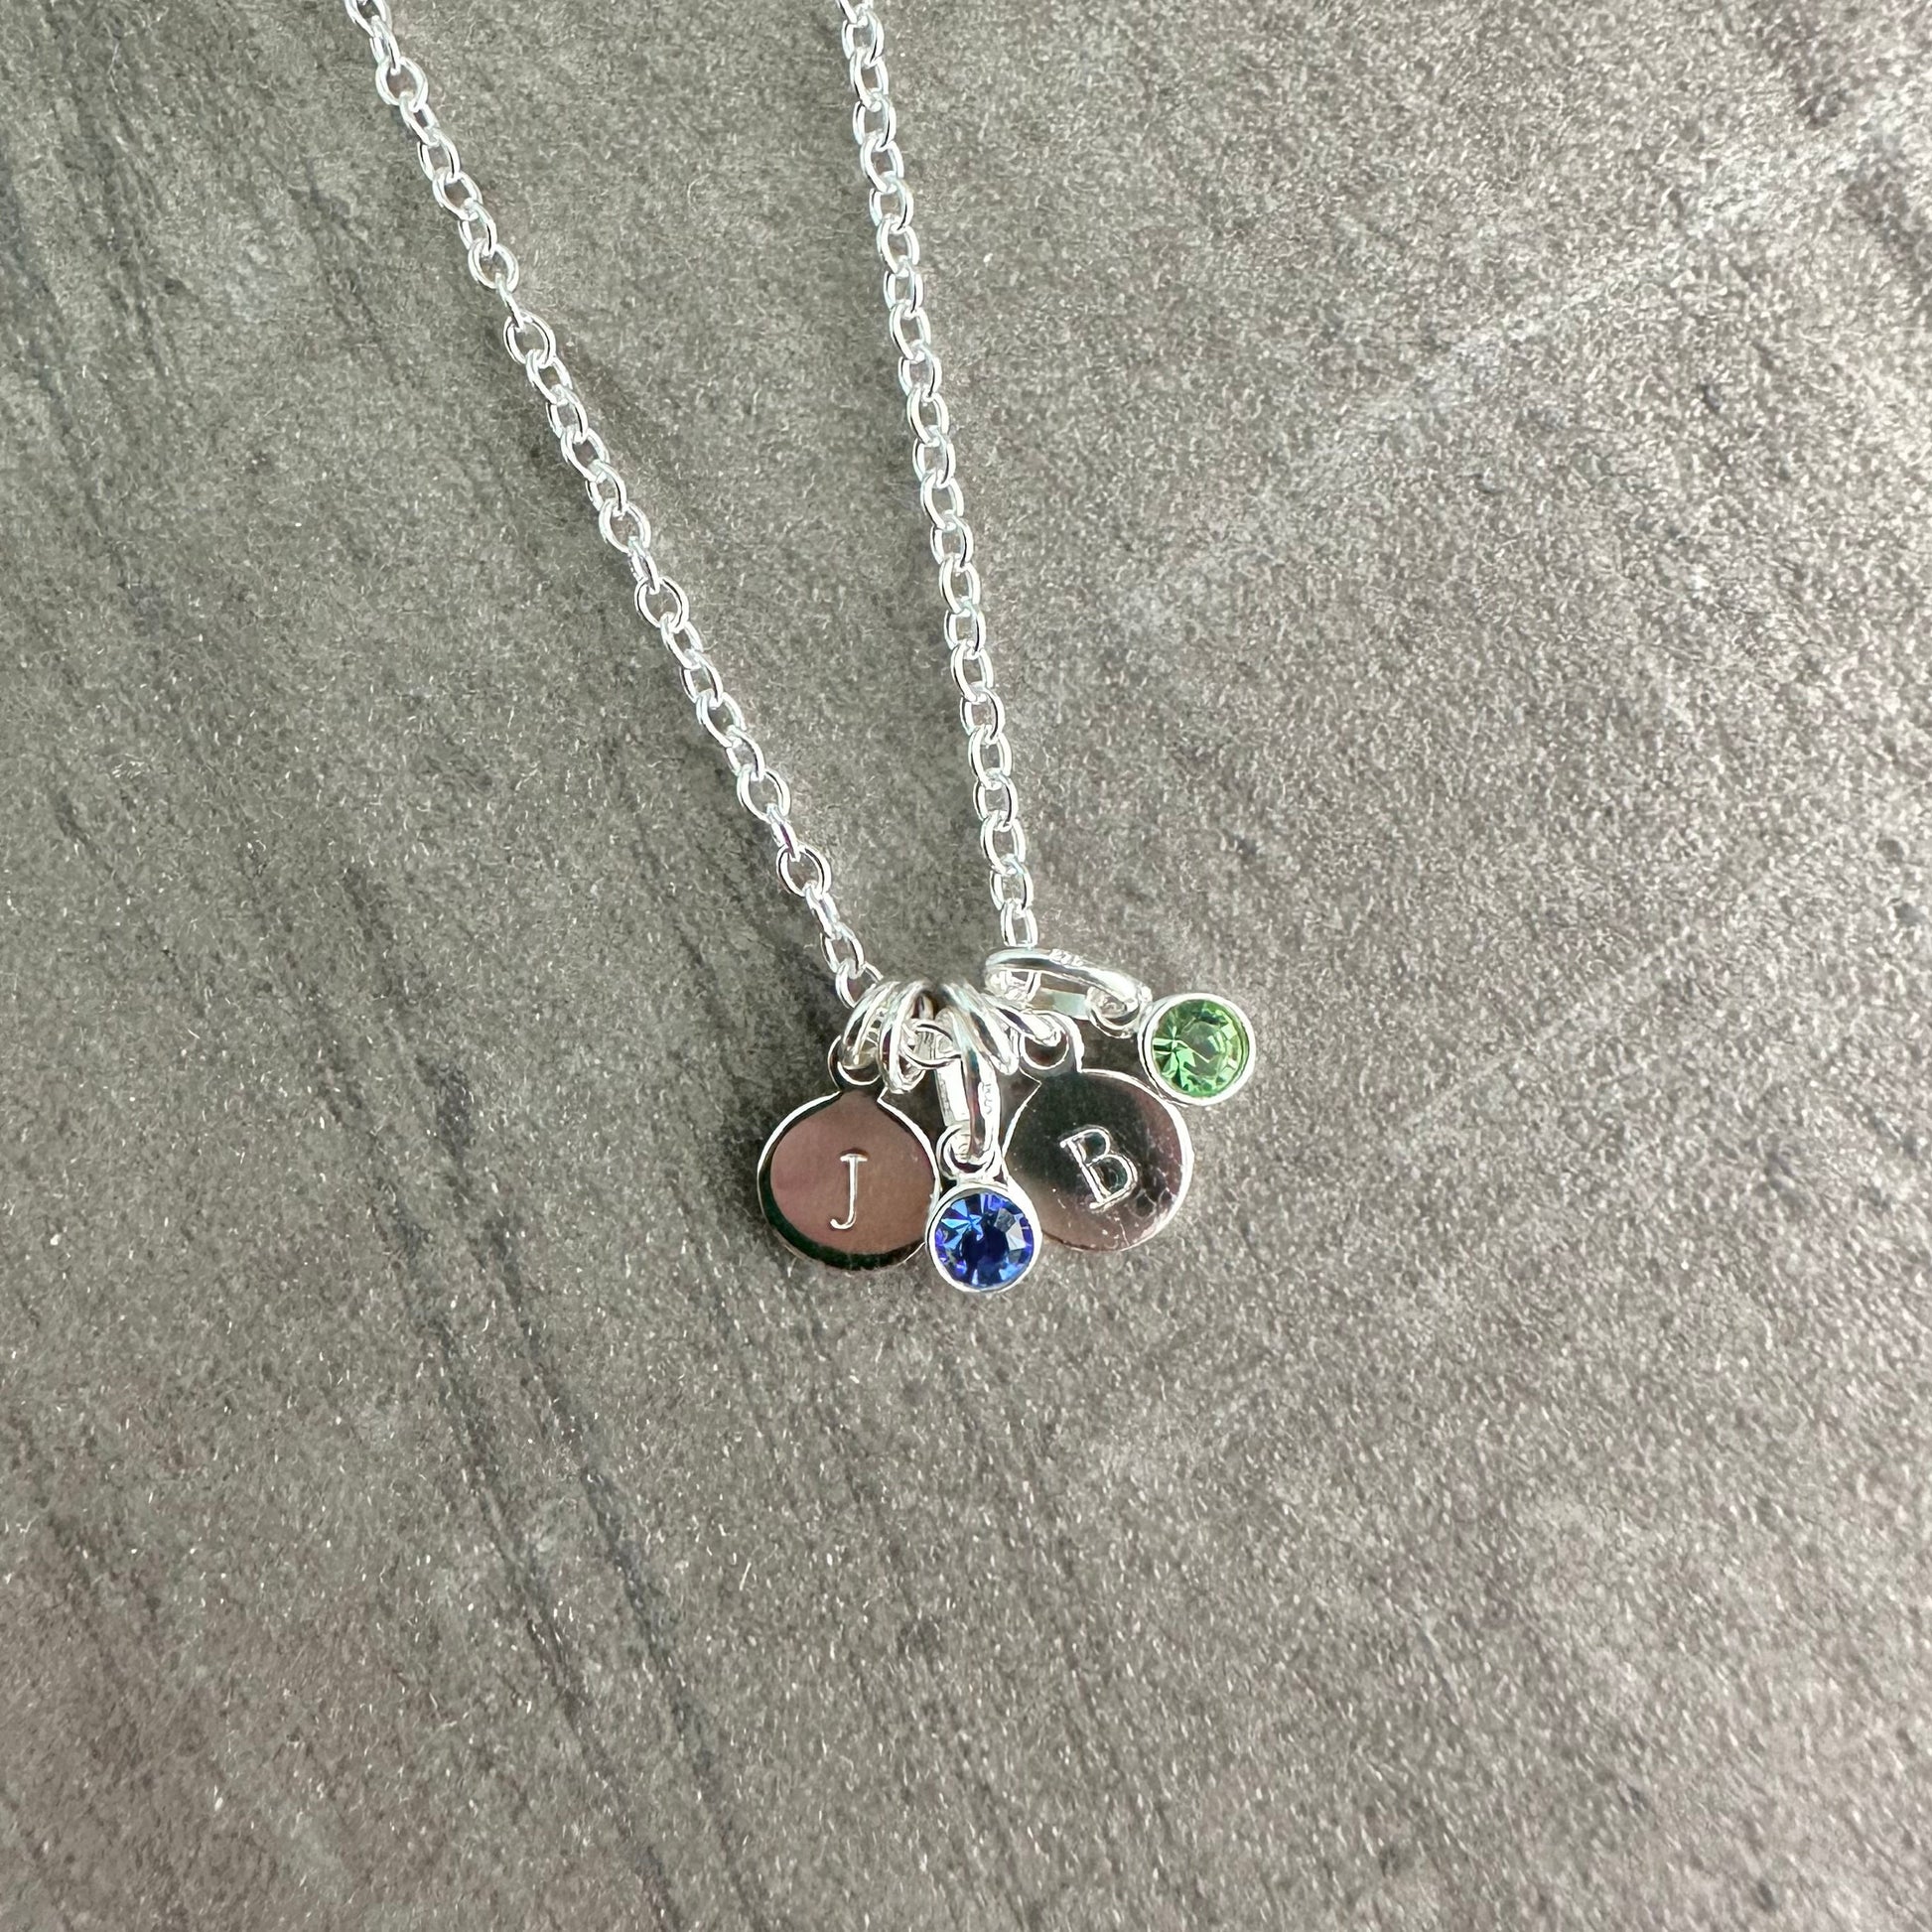 Personalised Crystal Birthstone Charm Necklace with Initials, Sentimental Gift for Mum